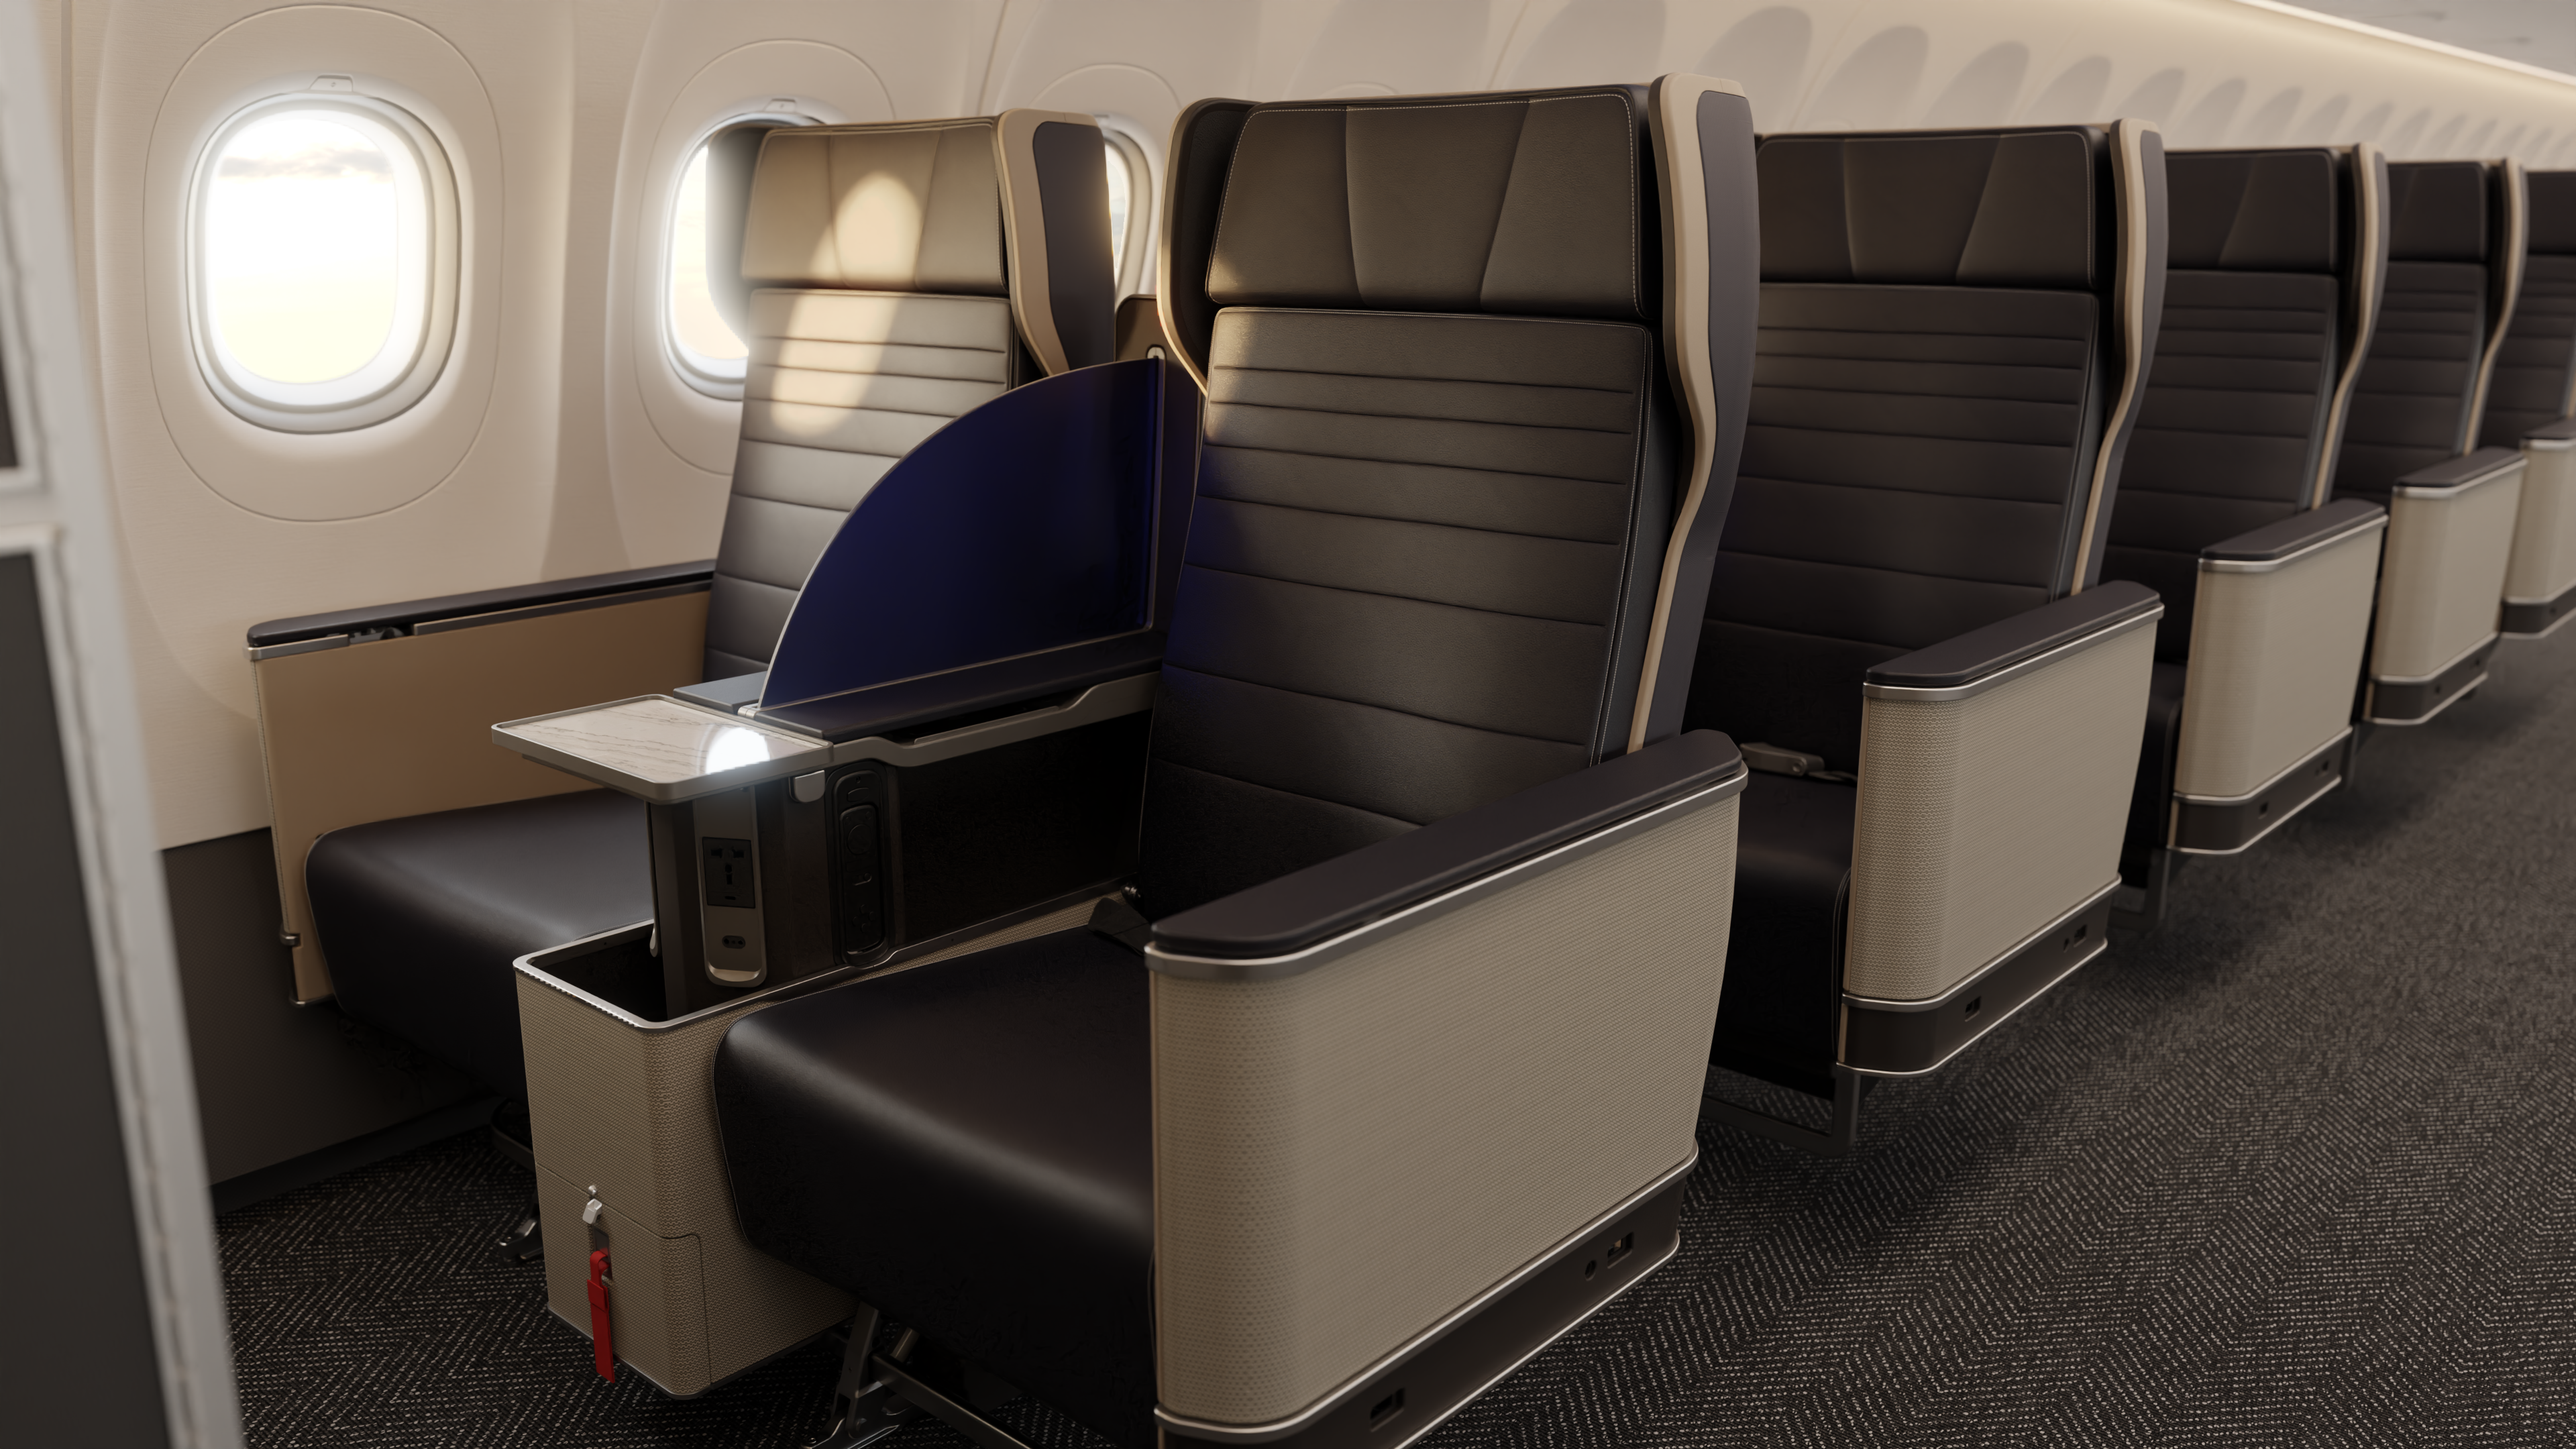 United Airlines Rolls Out New Domestic First Class Product